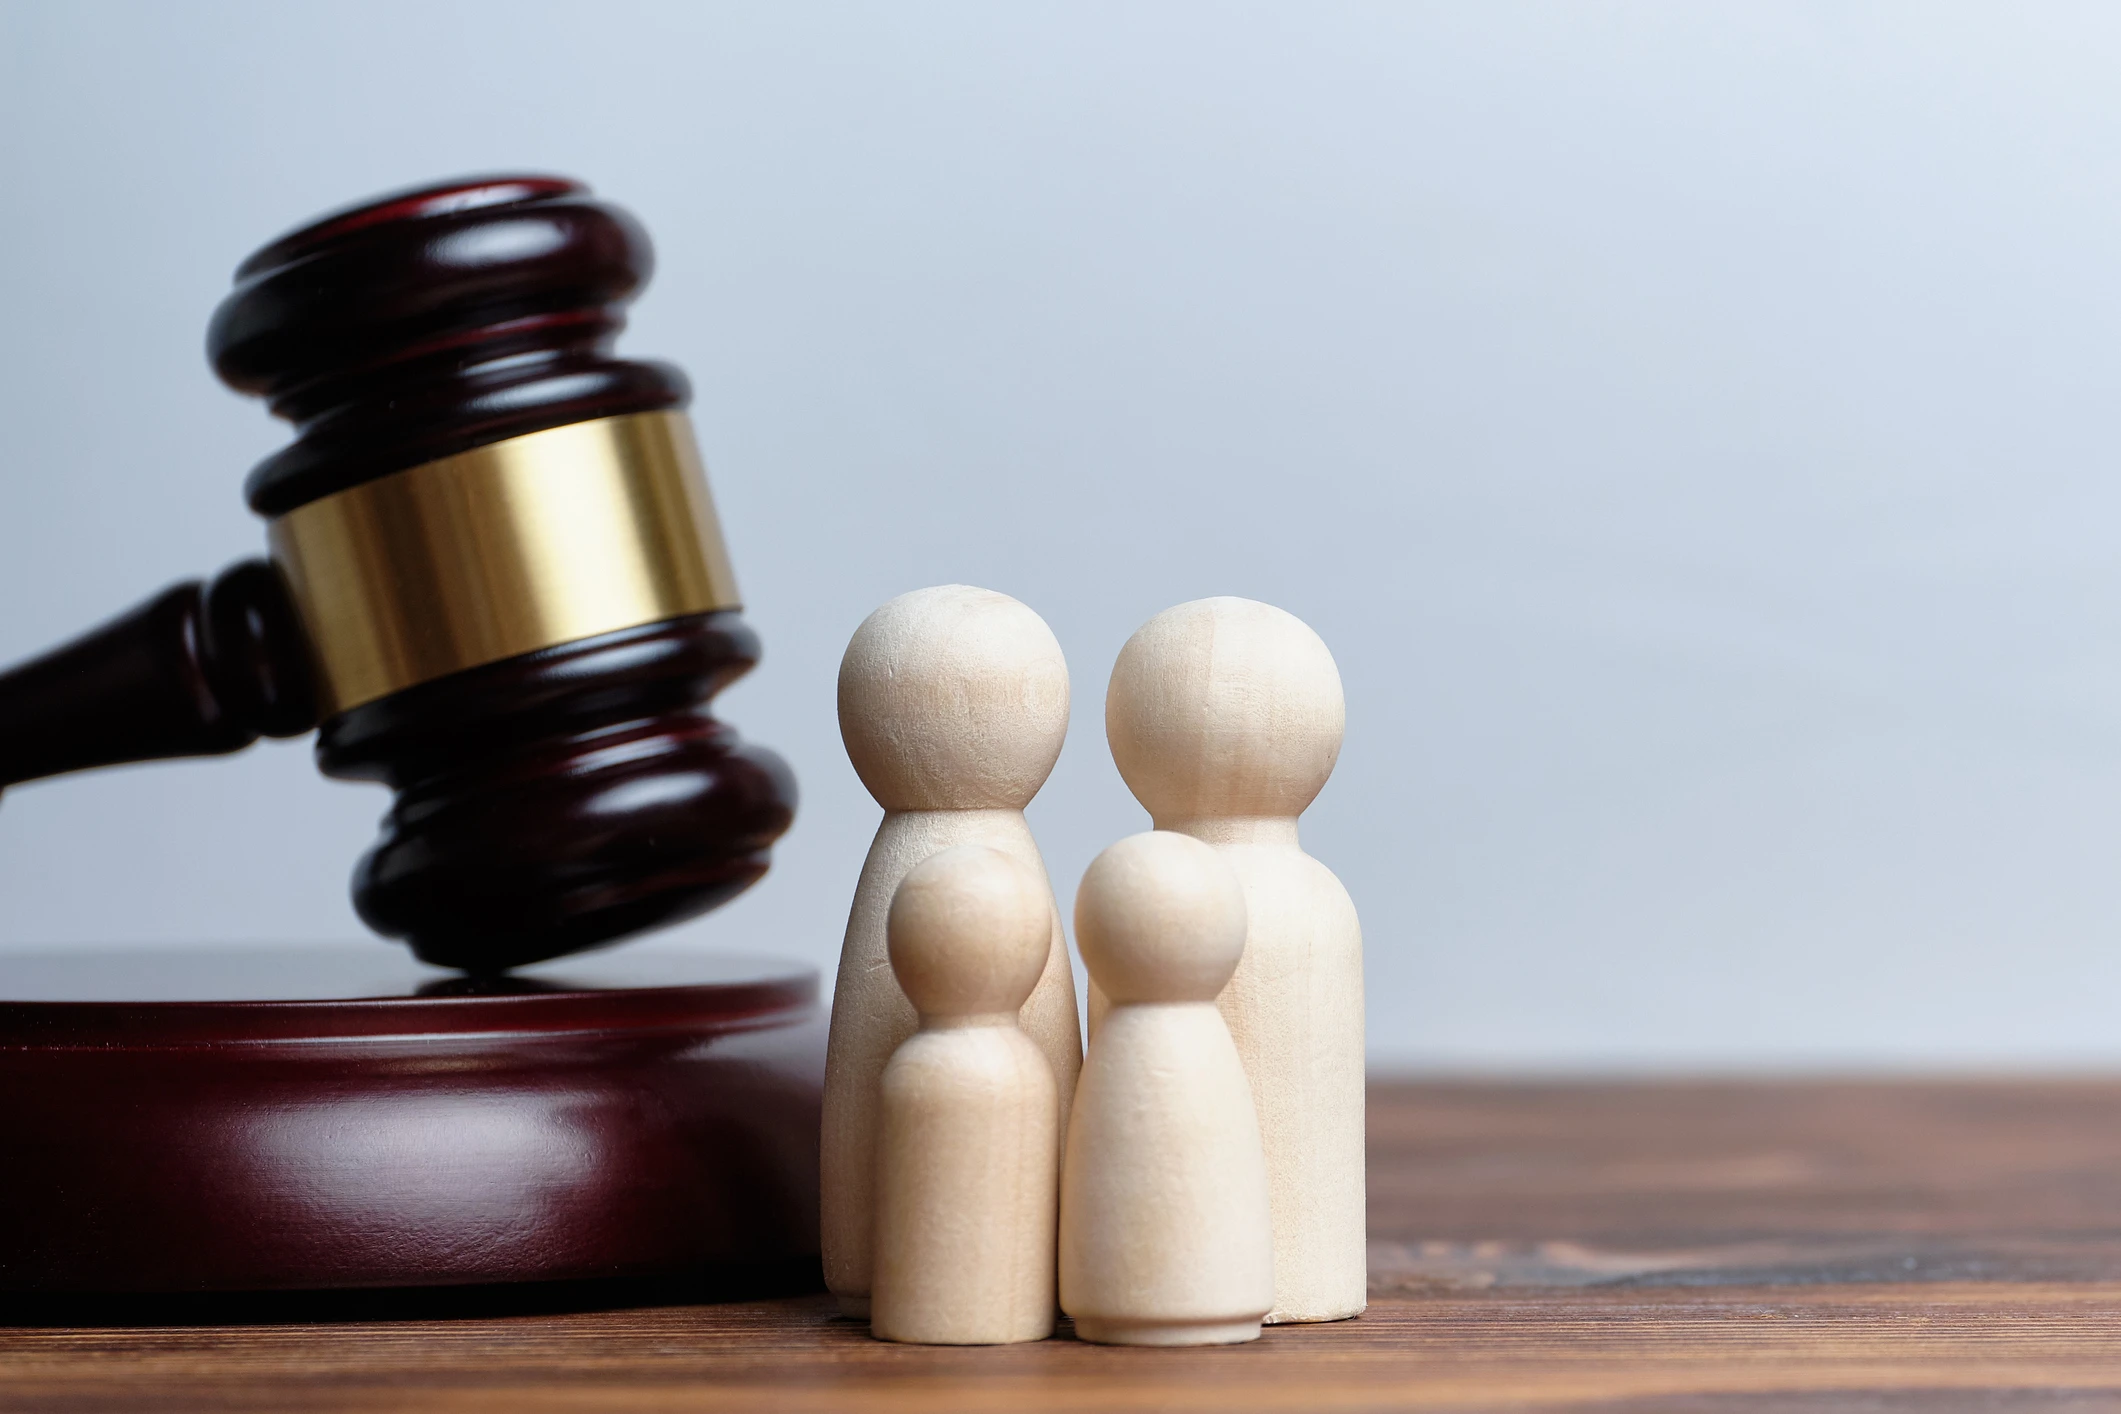 A small family of wooden figures next to a judge's gavel.